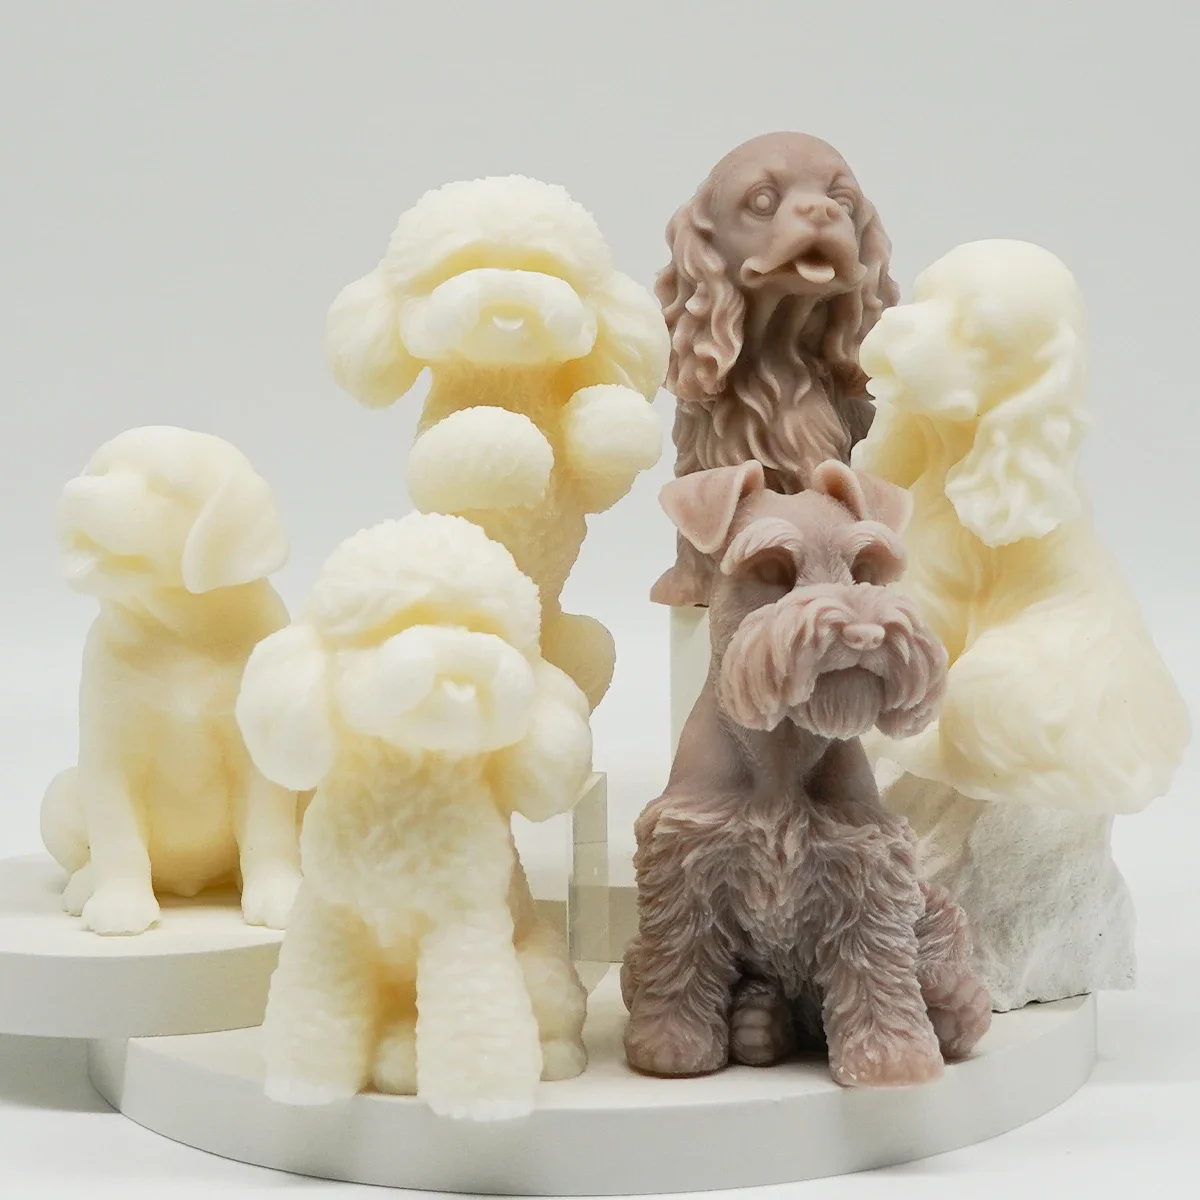 3D Golden Retriever Labrador Candle Silicone Mold Poodle Teddy Dog Painting Plaster Decor Animal Puppy Chocolate Making Kit Gift